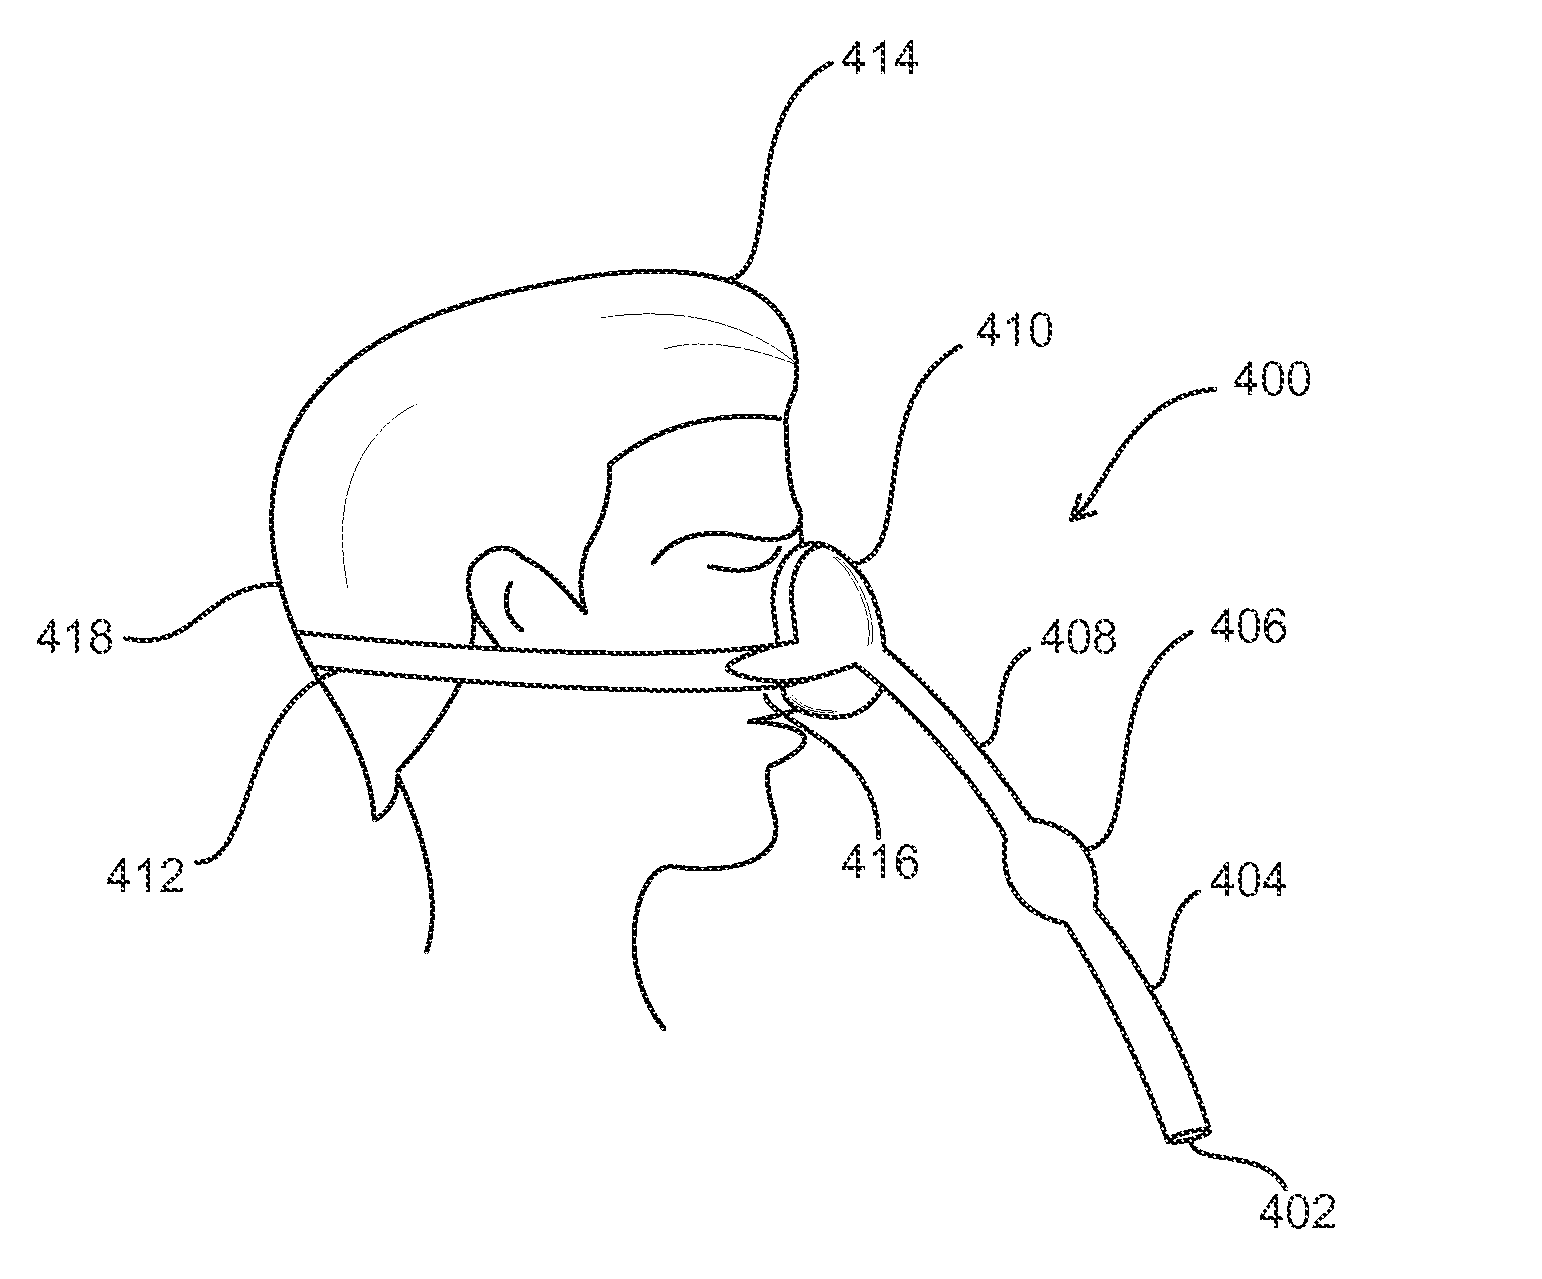 Systems and methods for providing positive airway pressure in a tube-like structure